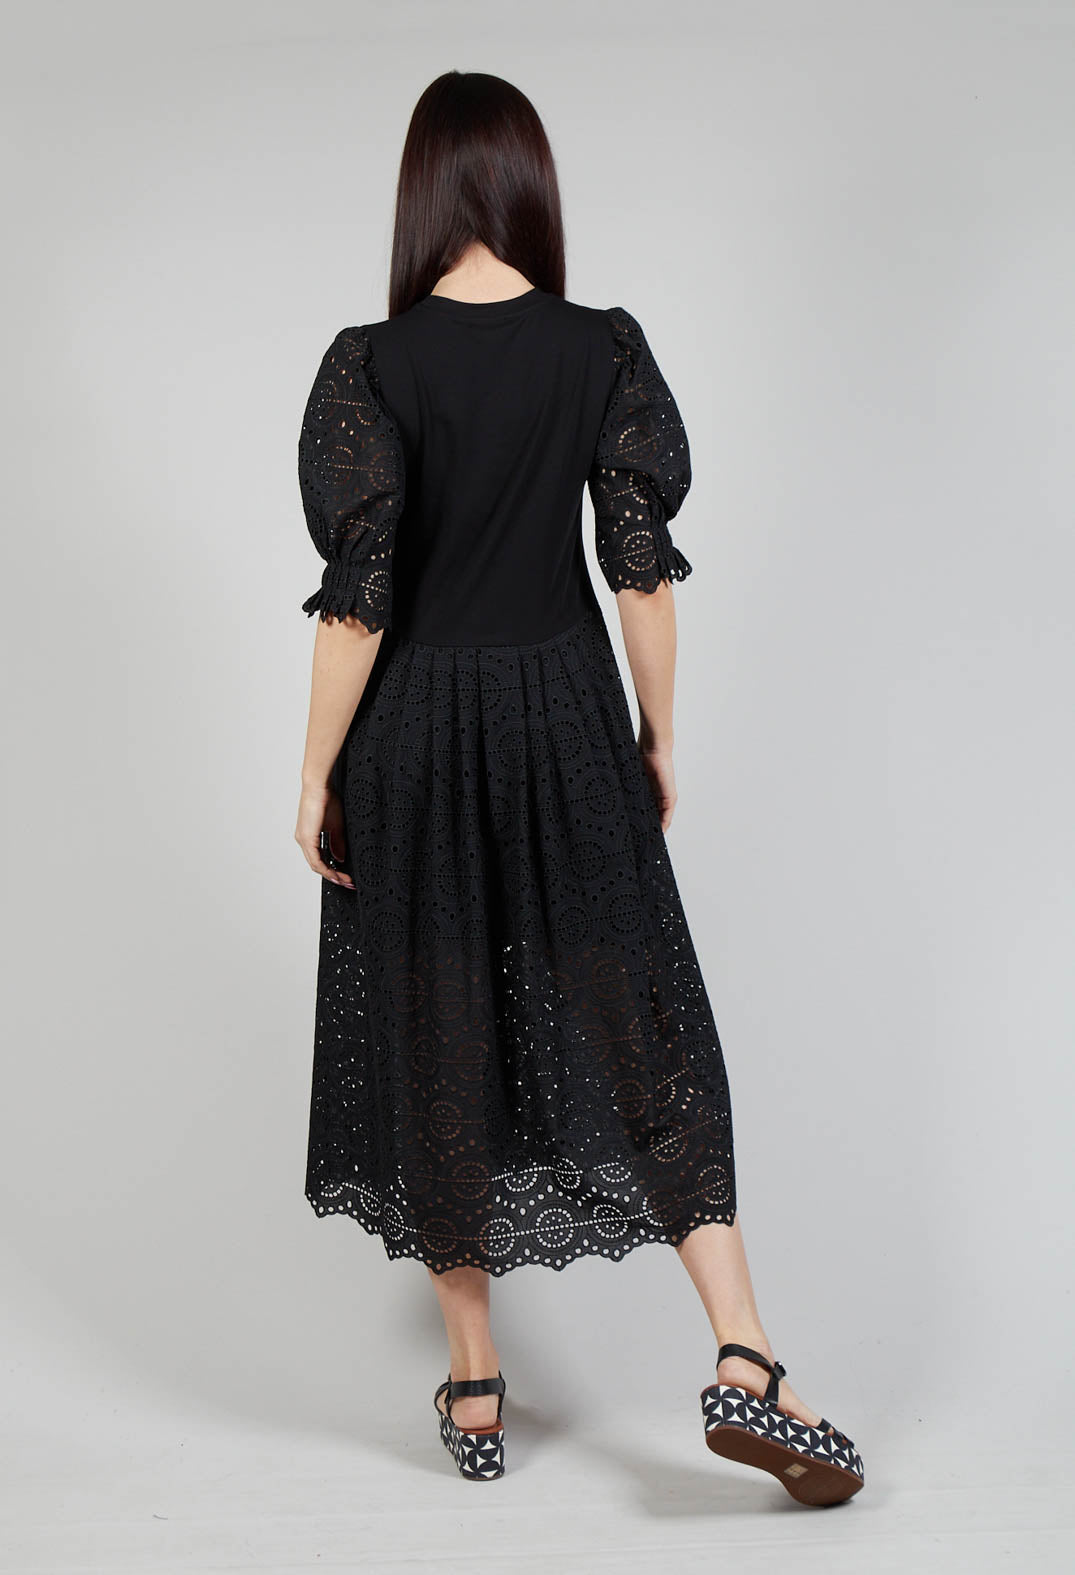 Lace Dress in Summer Black